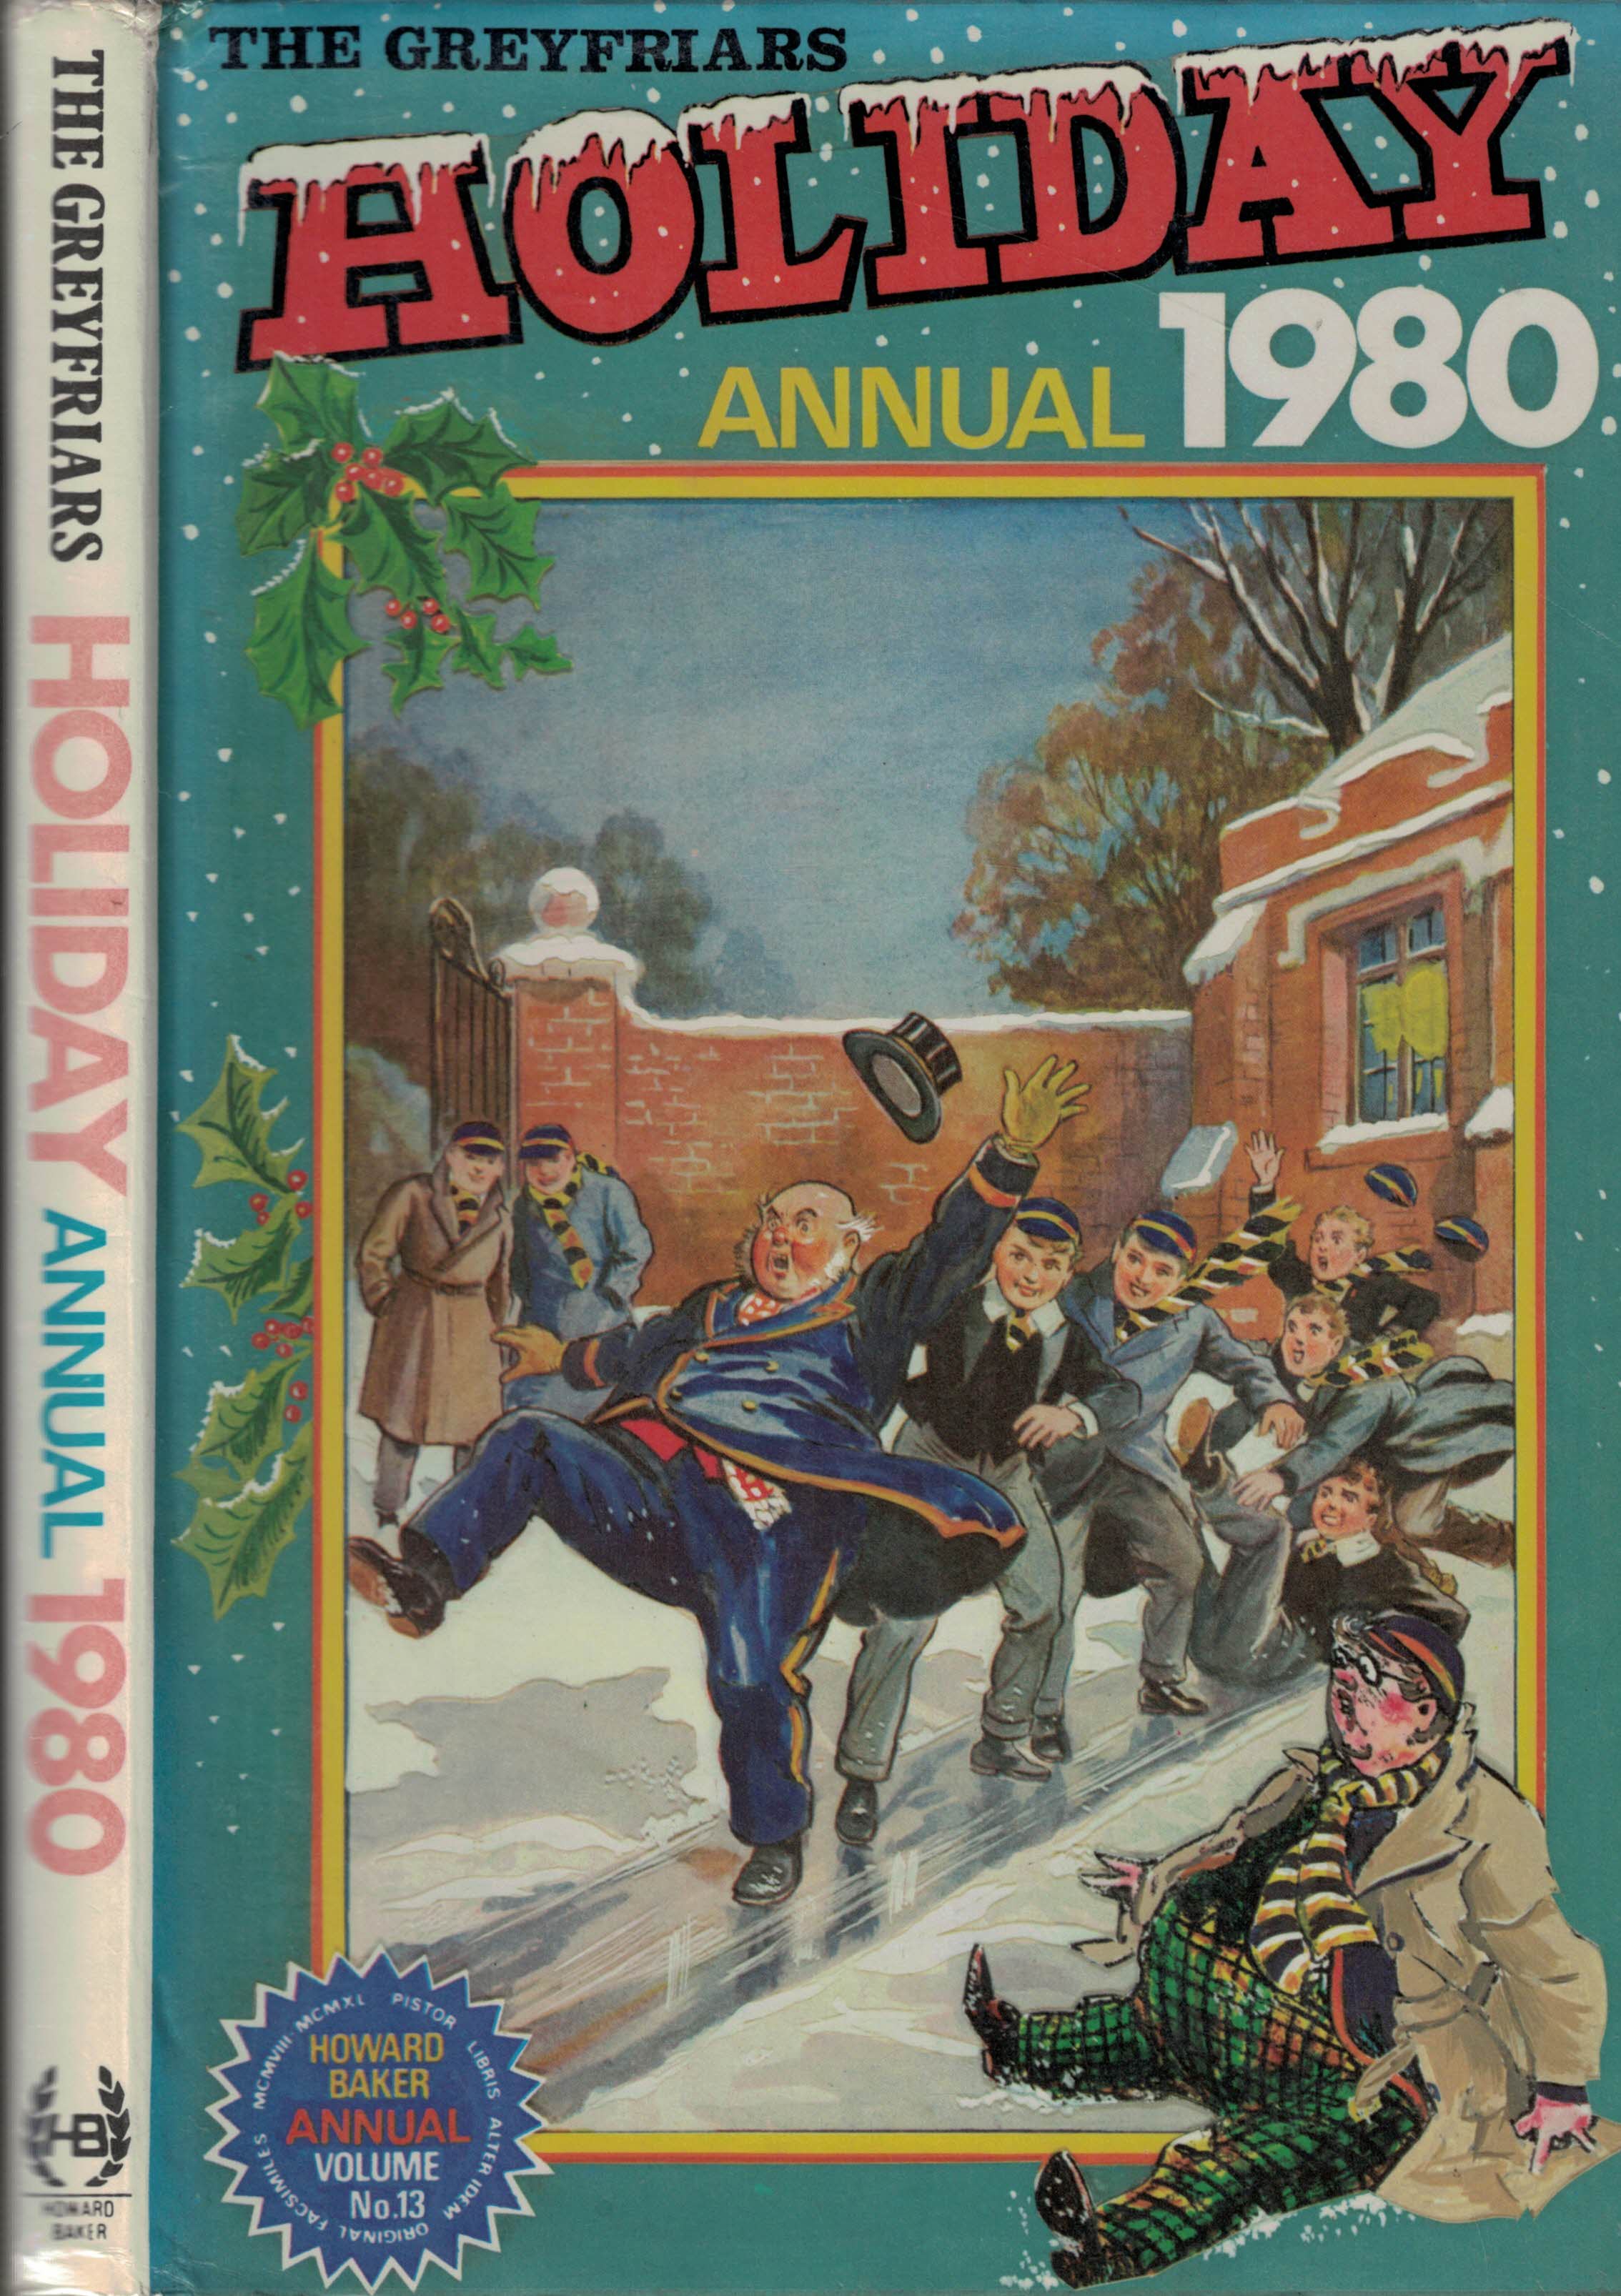 The Greyfriars Holiday Annual 1980